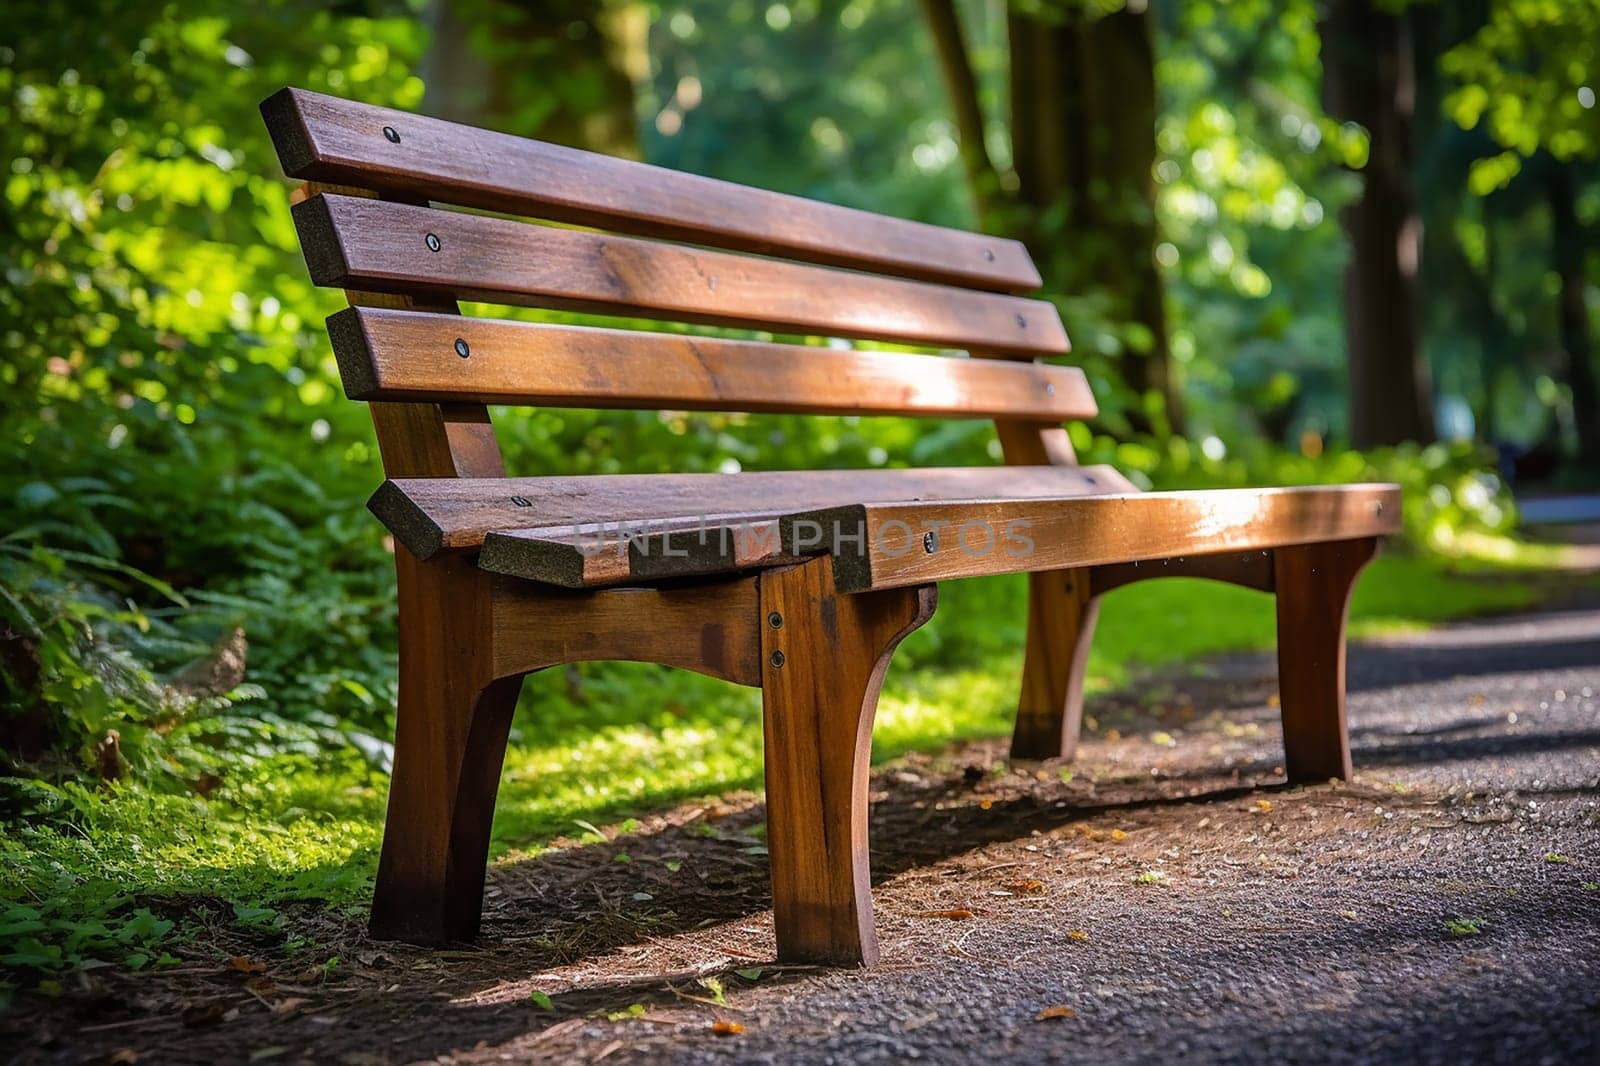 A bench in a park with tree and grass, bench in a garden on a sunny day outside by Hype2art